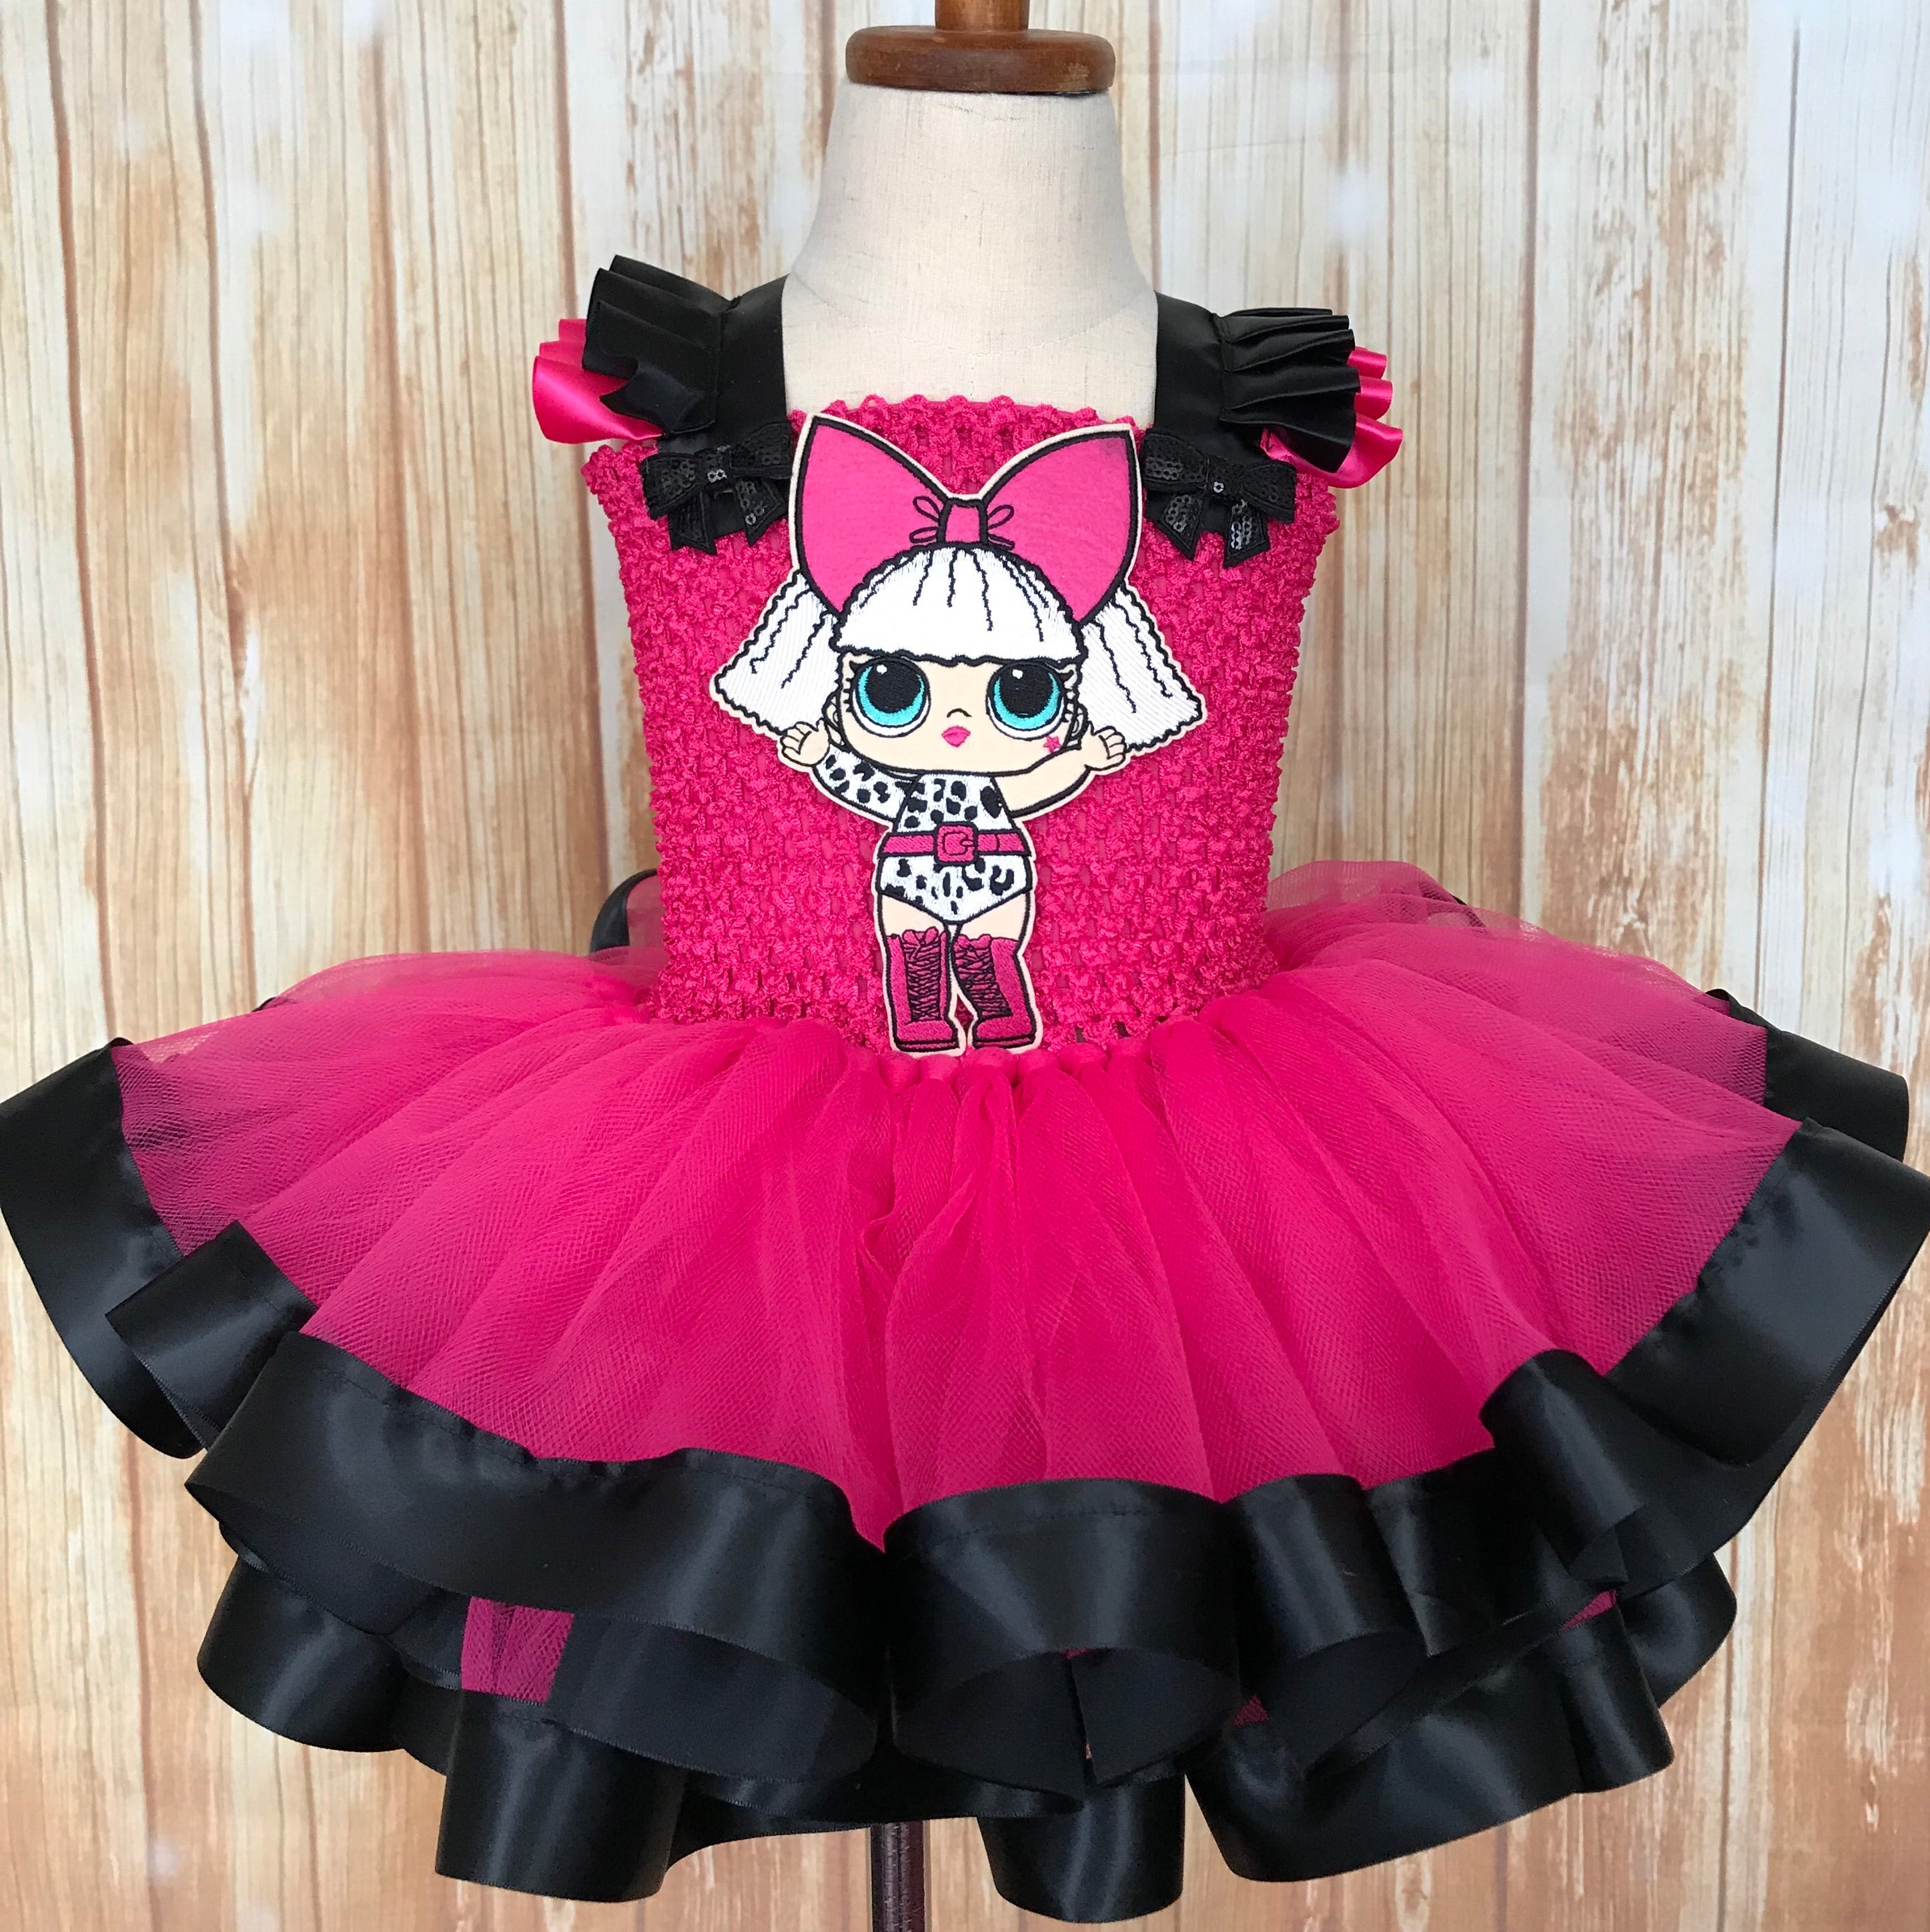 lol doll dresses for toddlers